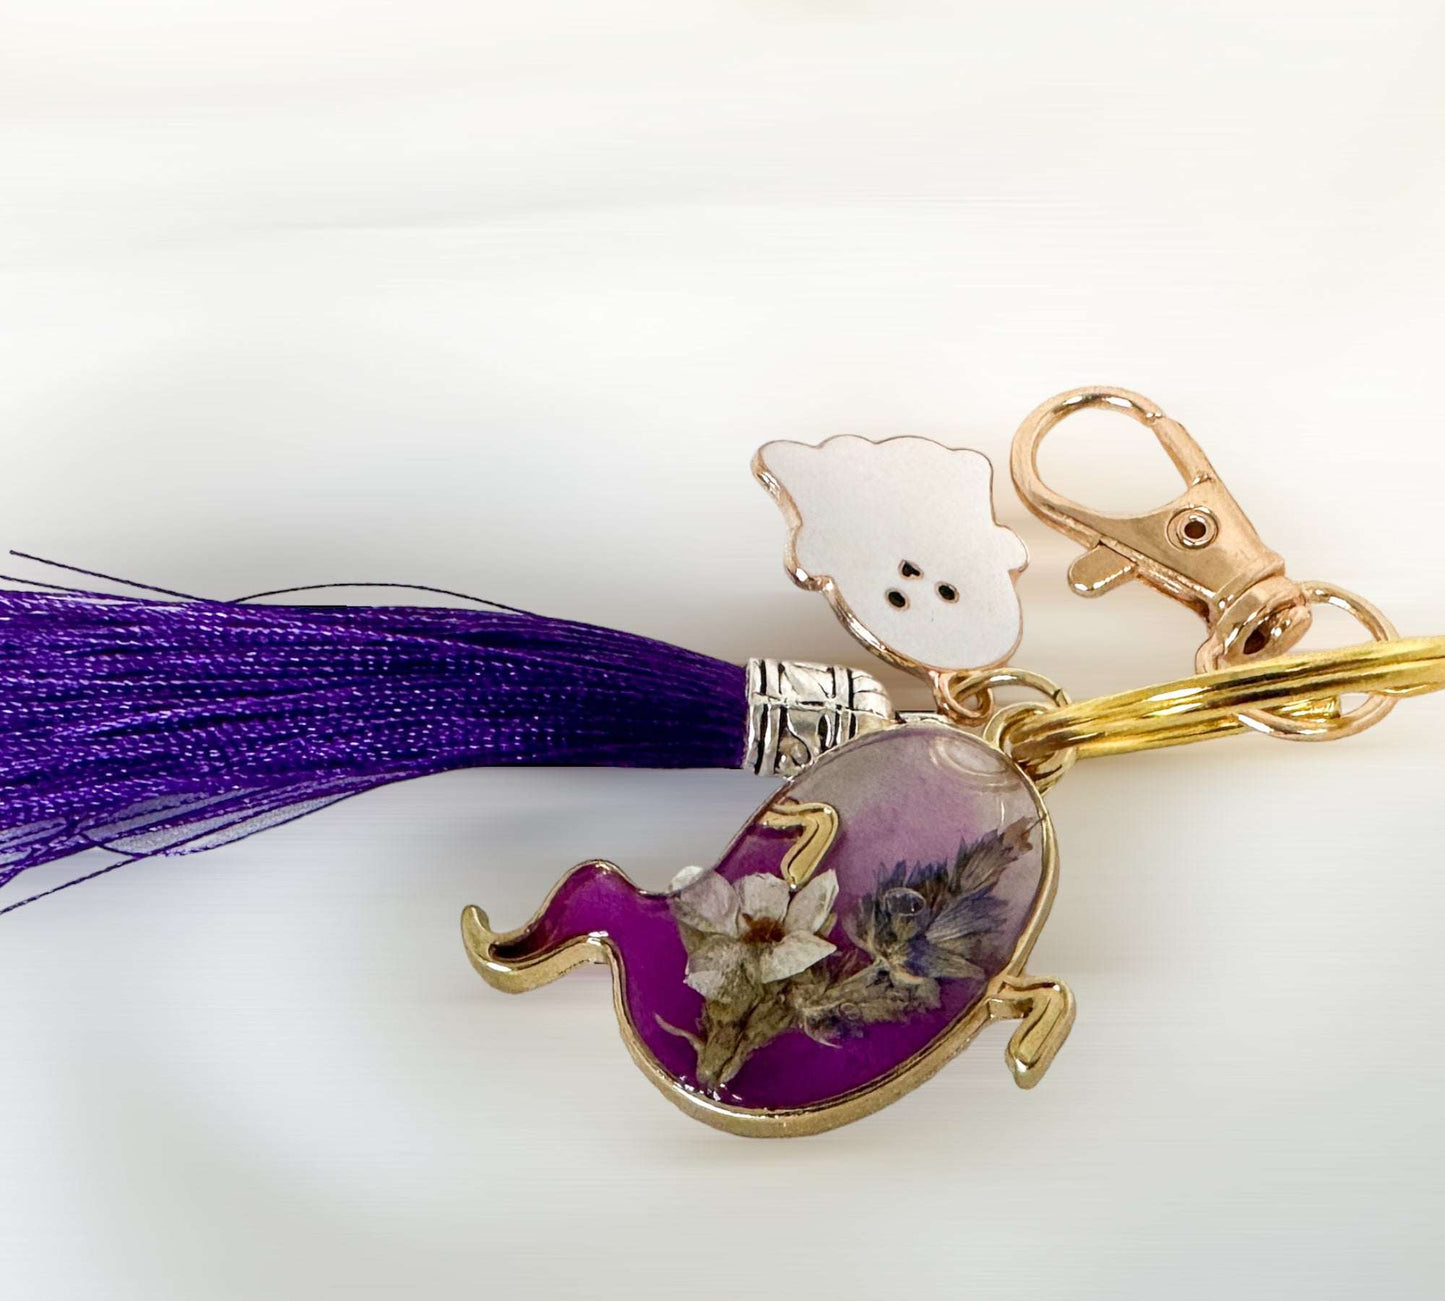 Haunted Halloween Ghost Keychains: Spooky Accessories for All